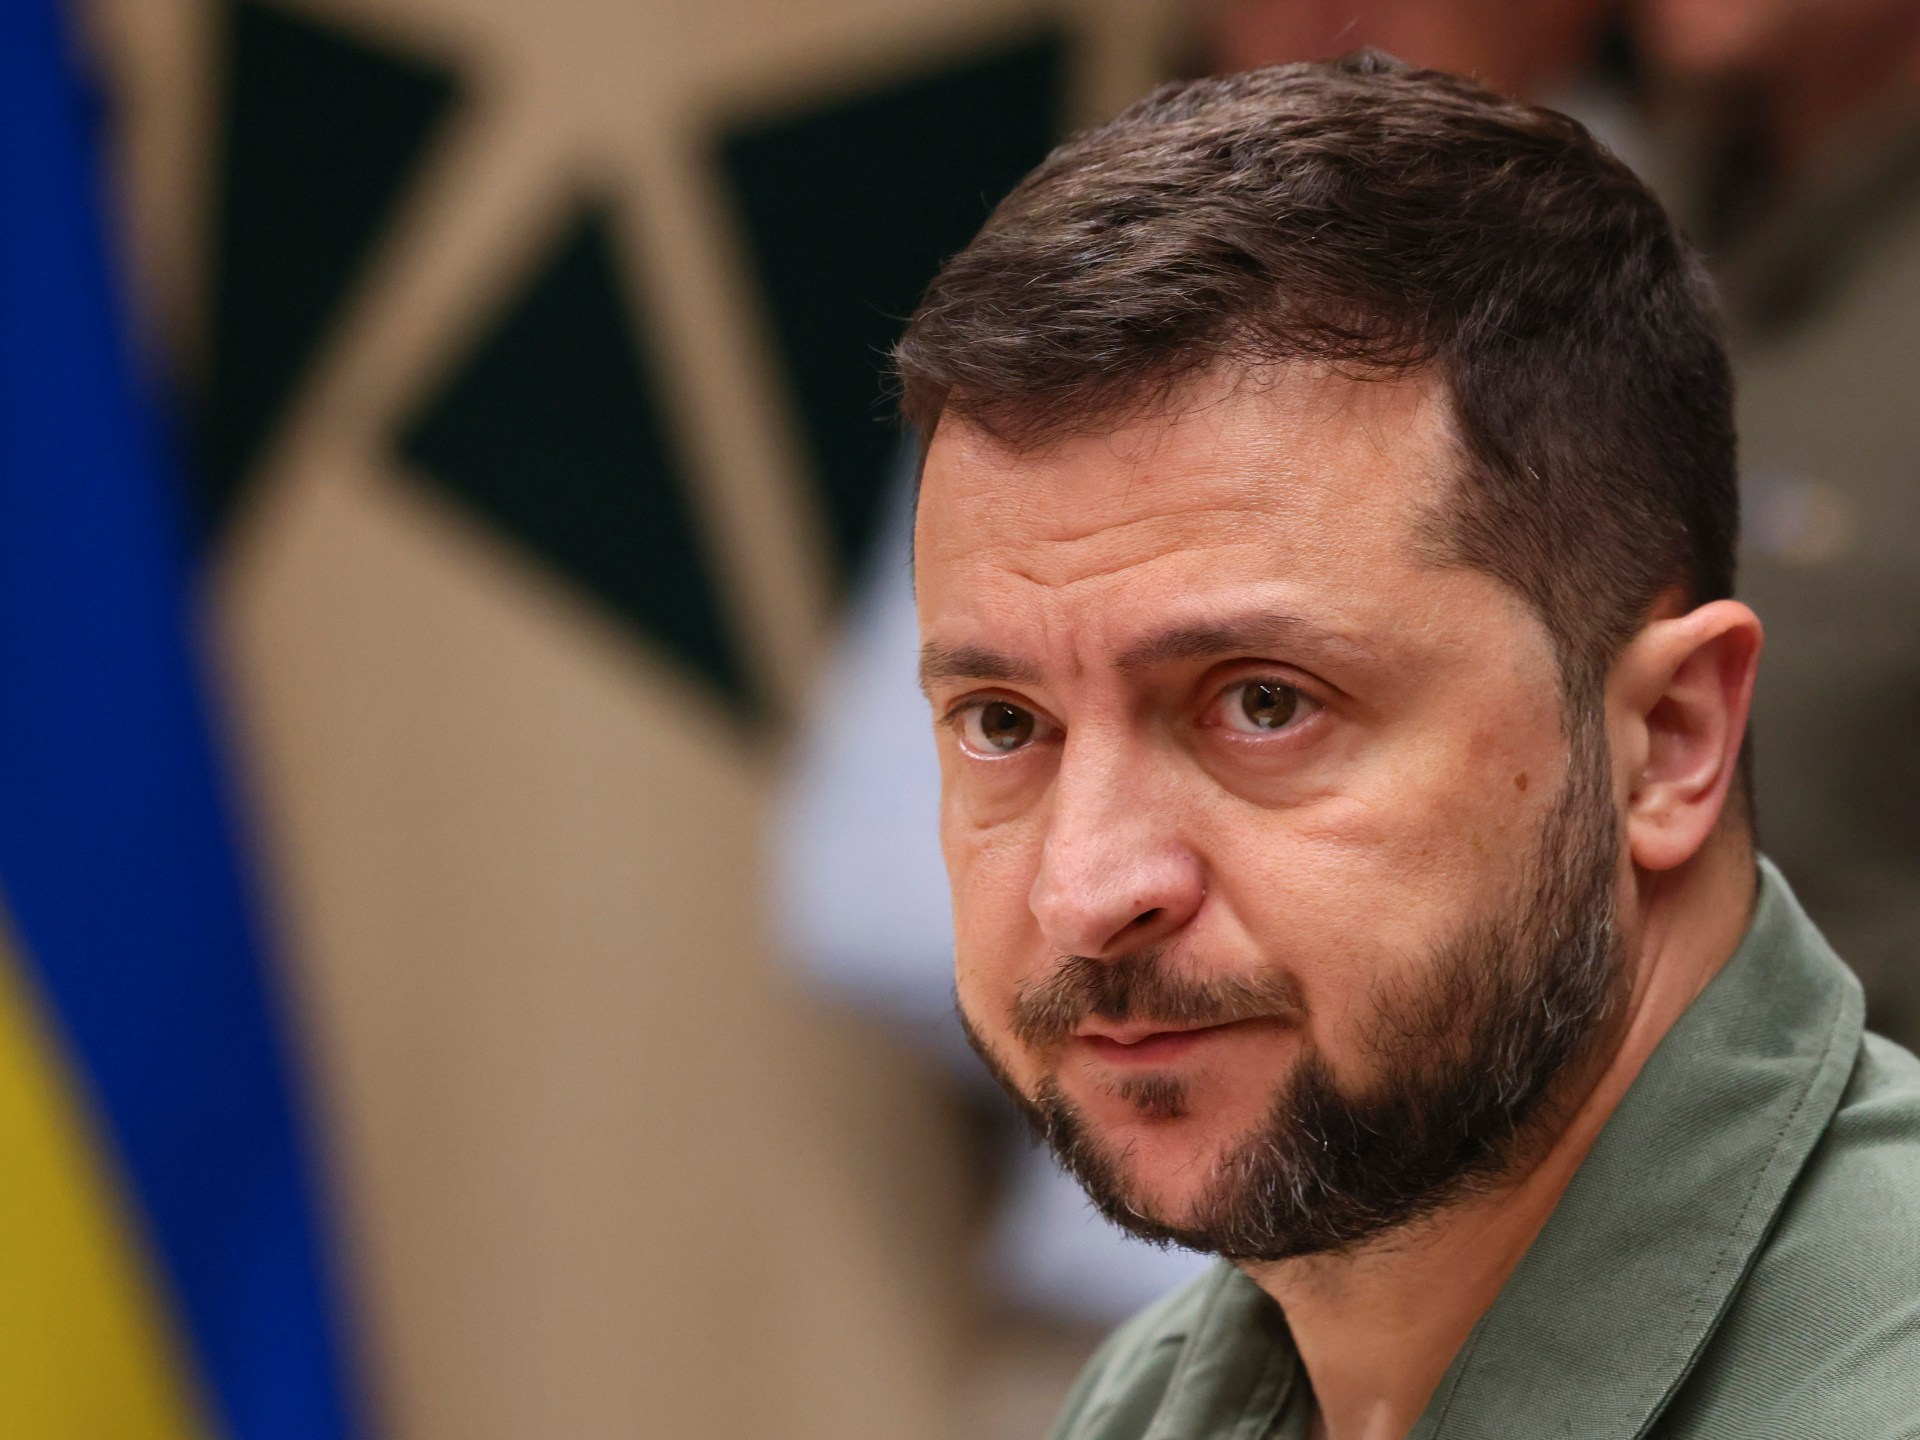 Bribery during war is treason: Zelensky expels army recruits |  News of the war between Russia and Ukraine